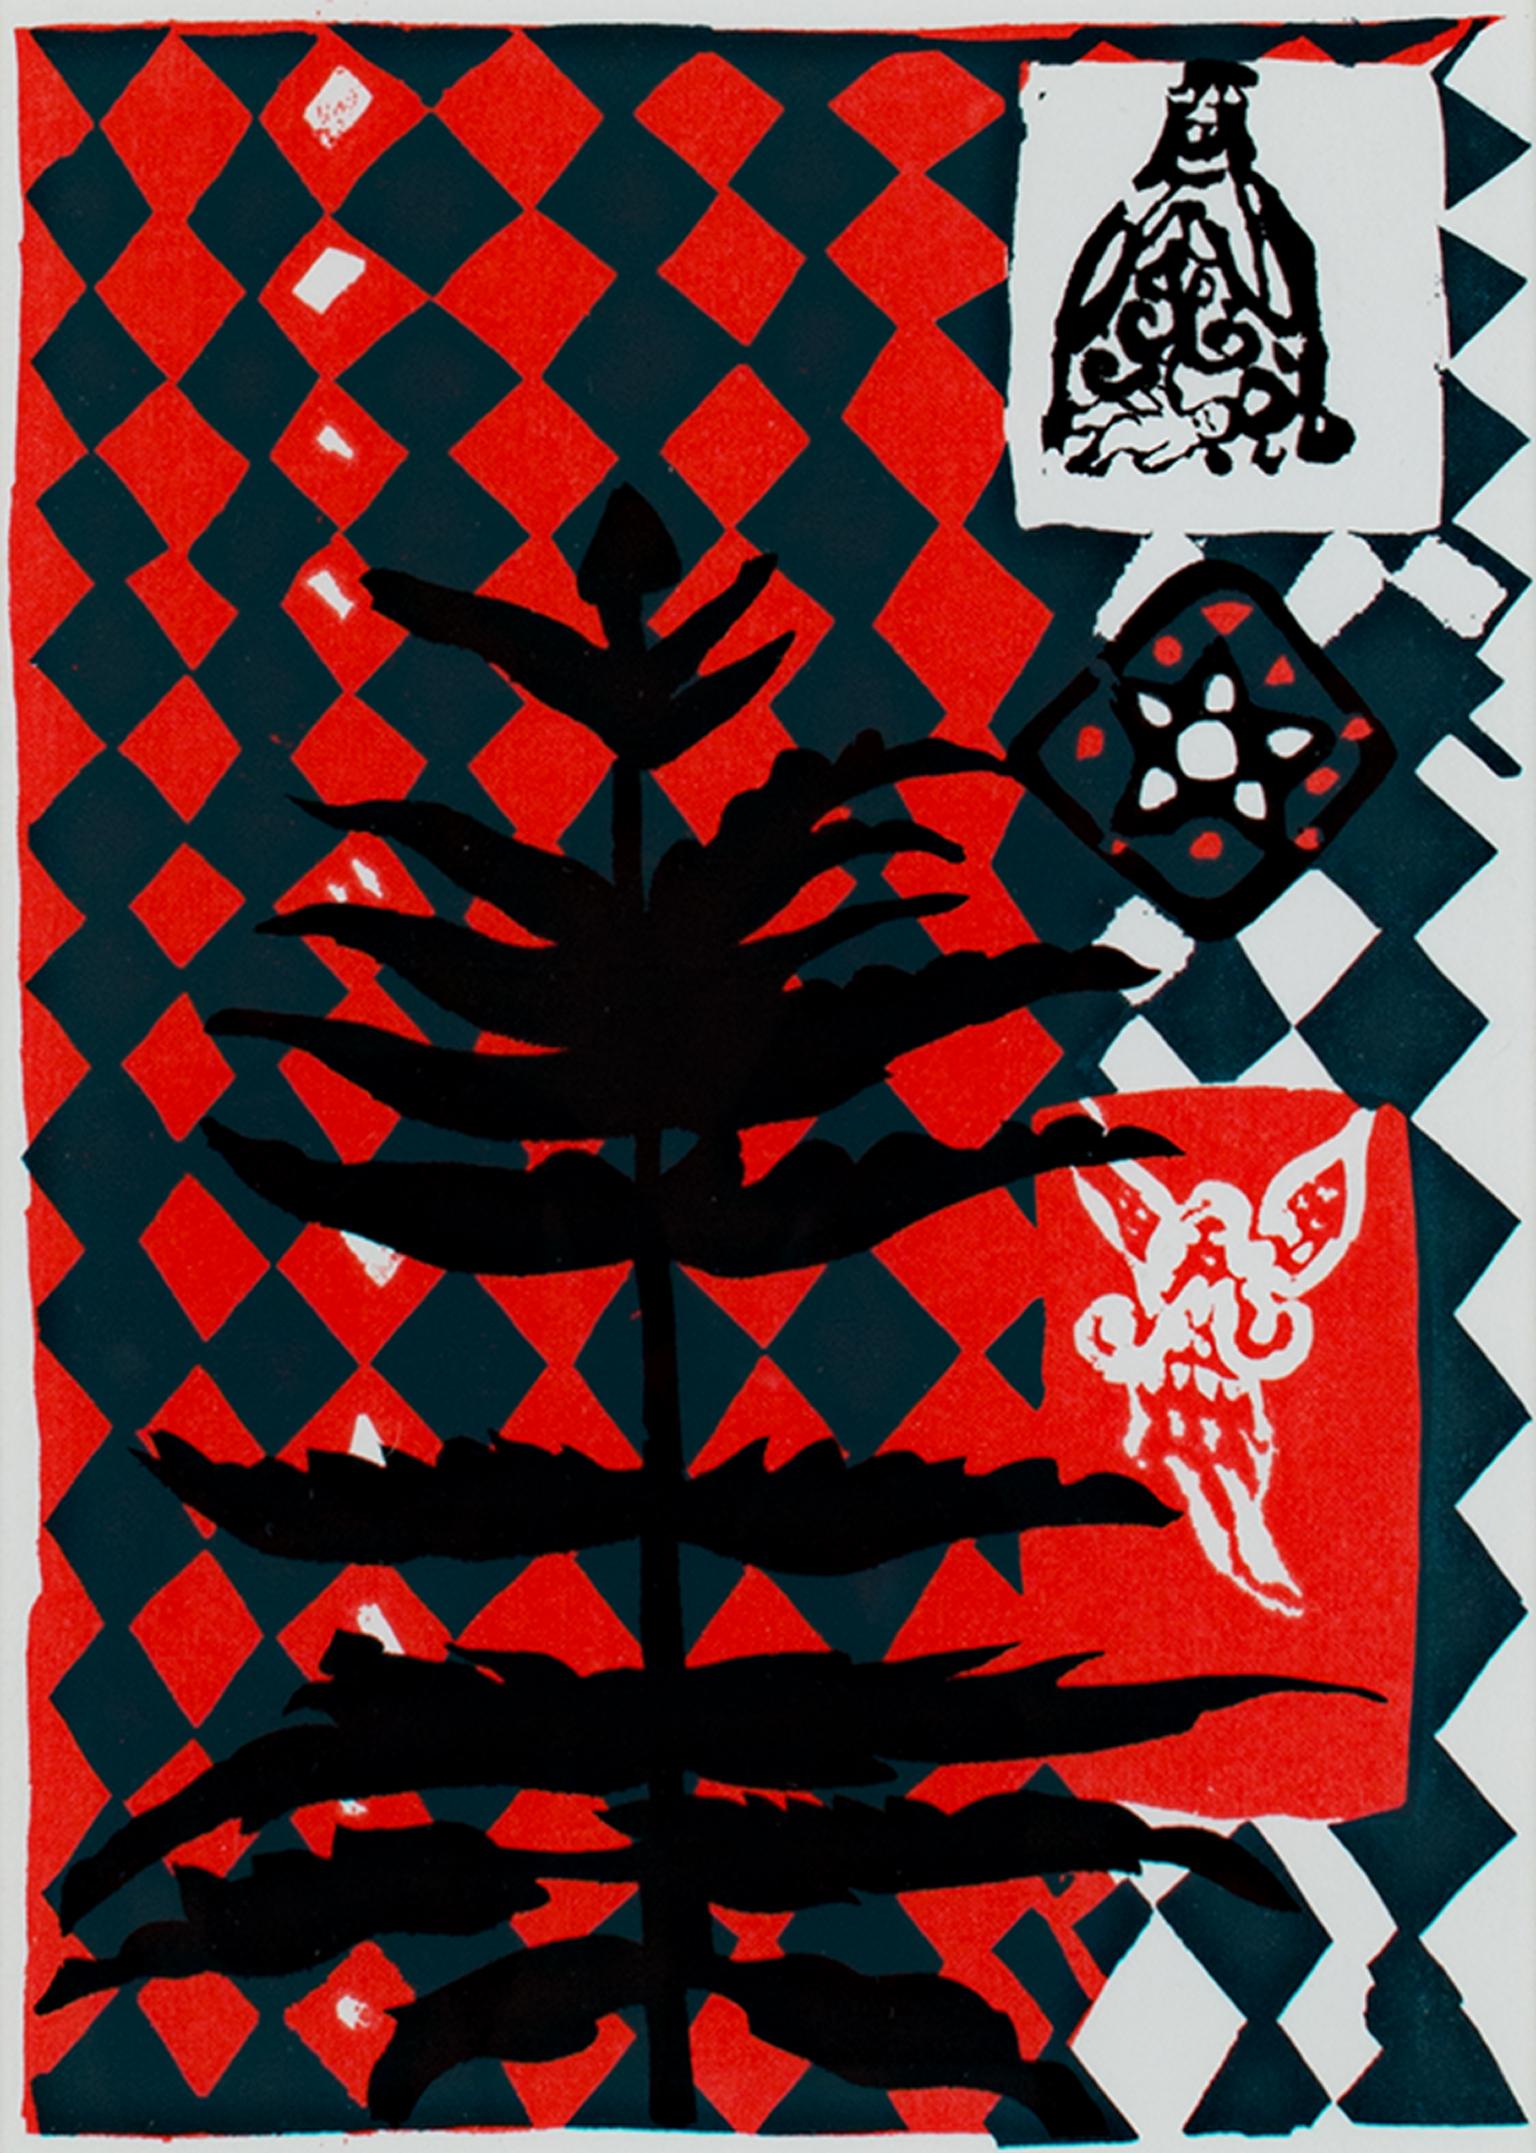 "Christmas Traditions 30119" is an original color silkscreen signed in screen on verso by Ruth Grotenrath. This piece depicts patterns in green and red as well as other Christmas images, like an evergreen tree and angel. 

6 3/8" x 4 1/2" art
13